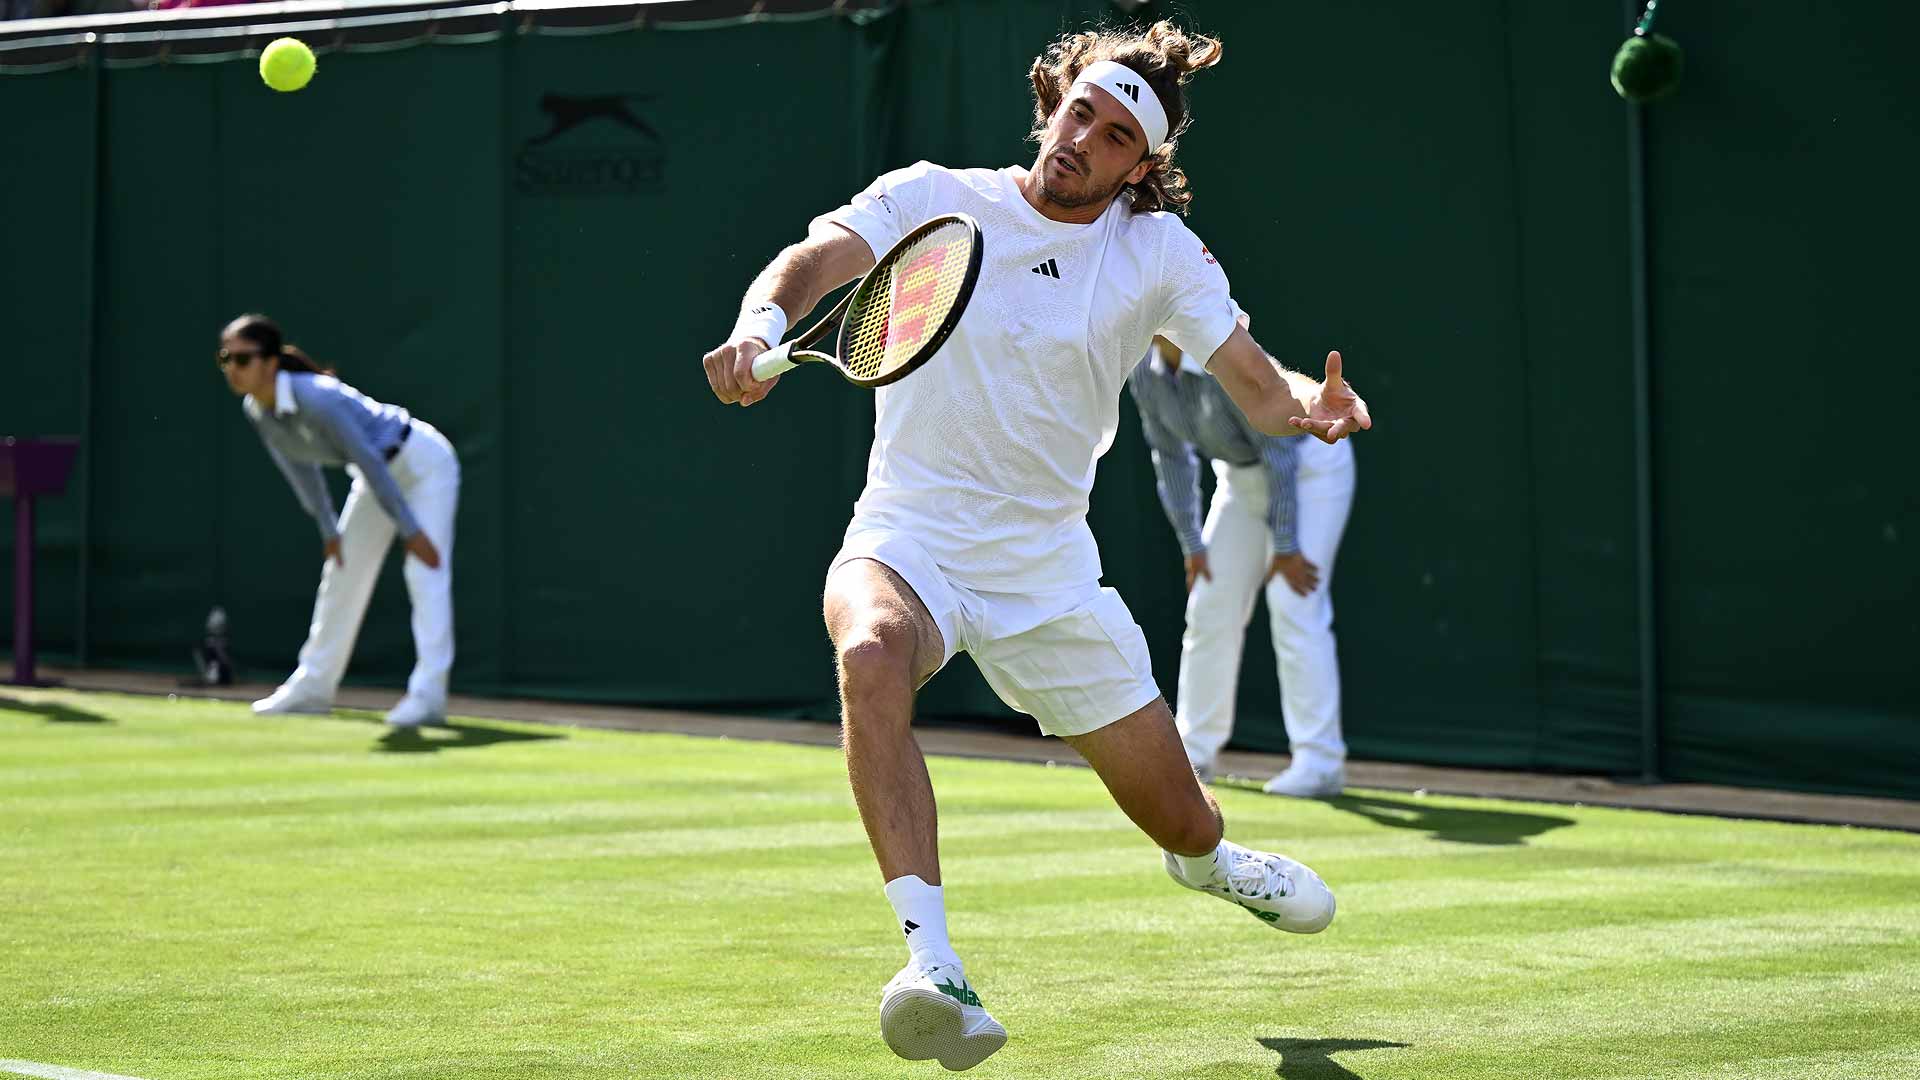 Stefanos Tsitsipas defeats Dominic Thiem in five sets to reach the second round at Wimbledon.